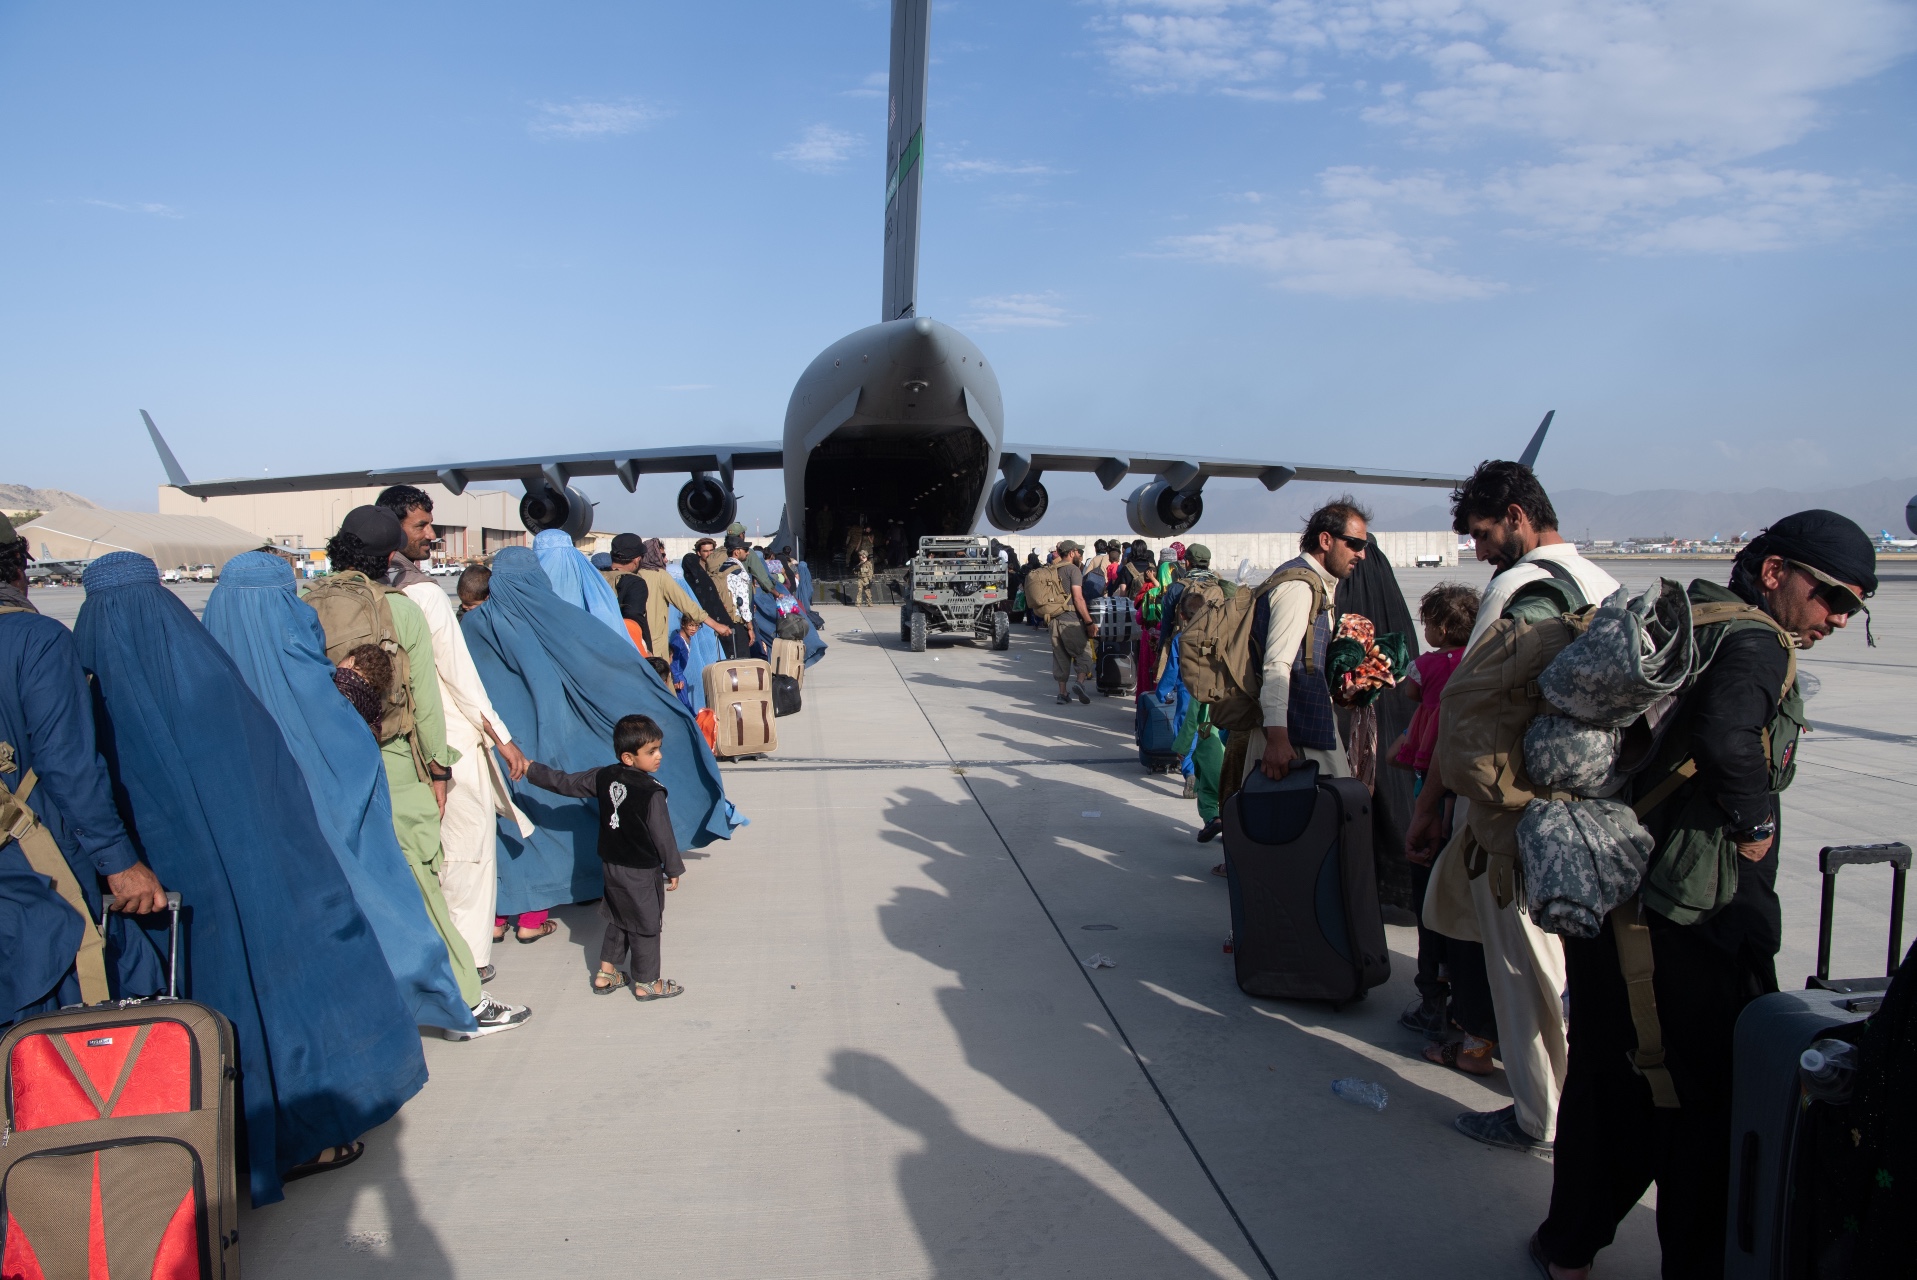 U.S. Air Force loadmasters and pilots assigned to the 816th Expeditionary Airlift Squadron, load passengers aboard a U.S. Air Force C-17 Globemaster III in support of the Afghanistan evacuation at Hamid Karzai International Airport